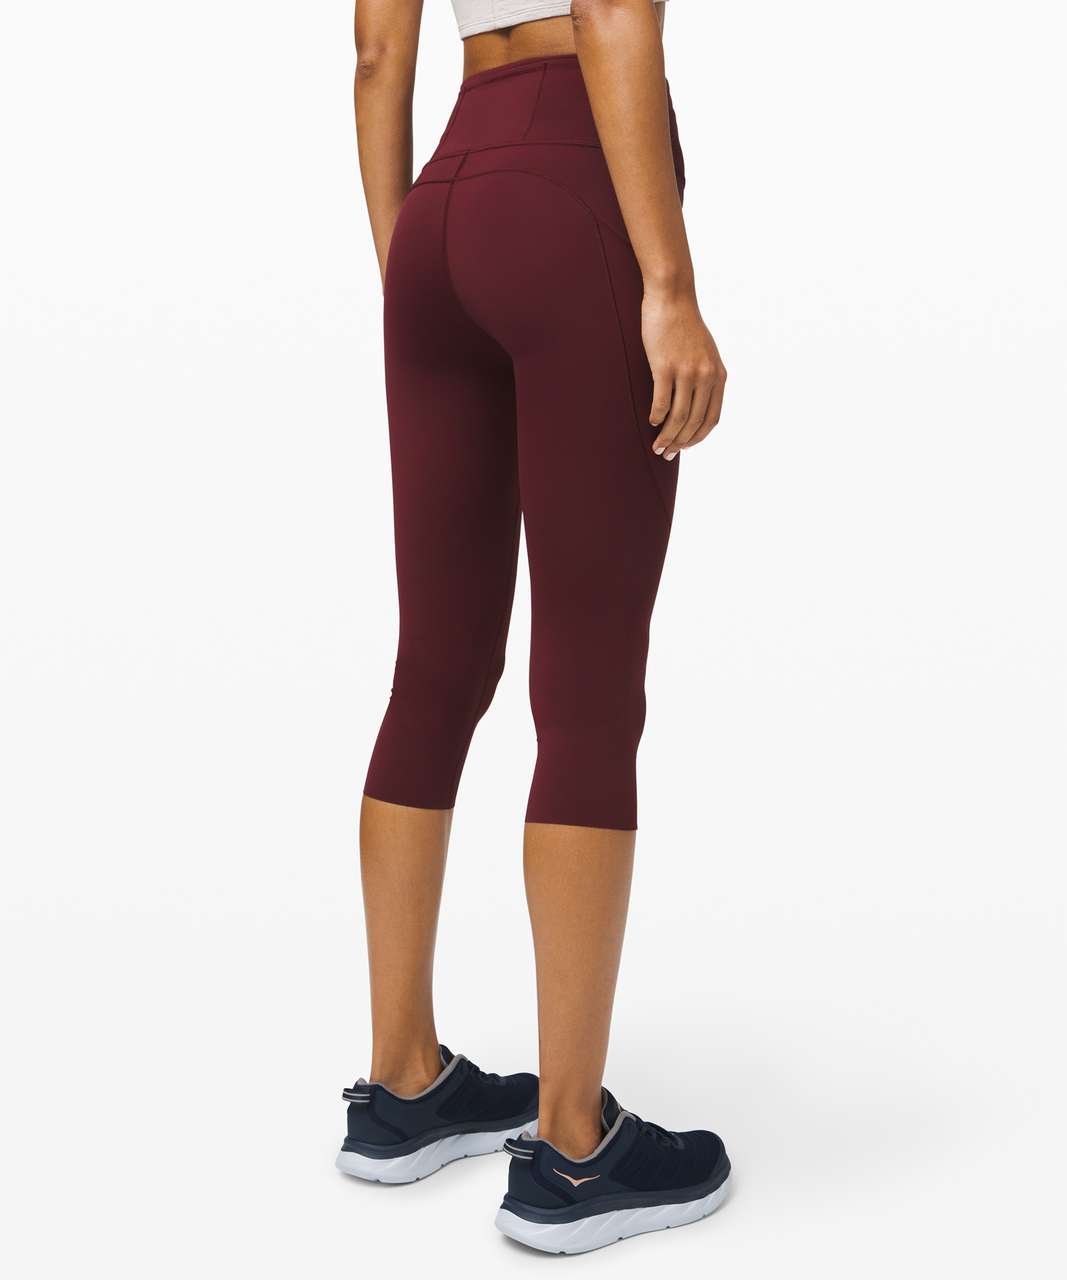 Lululemon Fast and Free High-Rise Crop II *Non-Reflective Nulux - Garnet